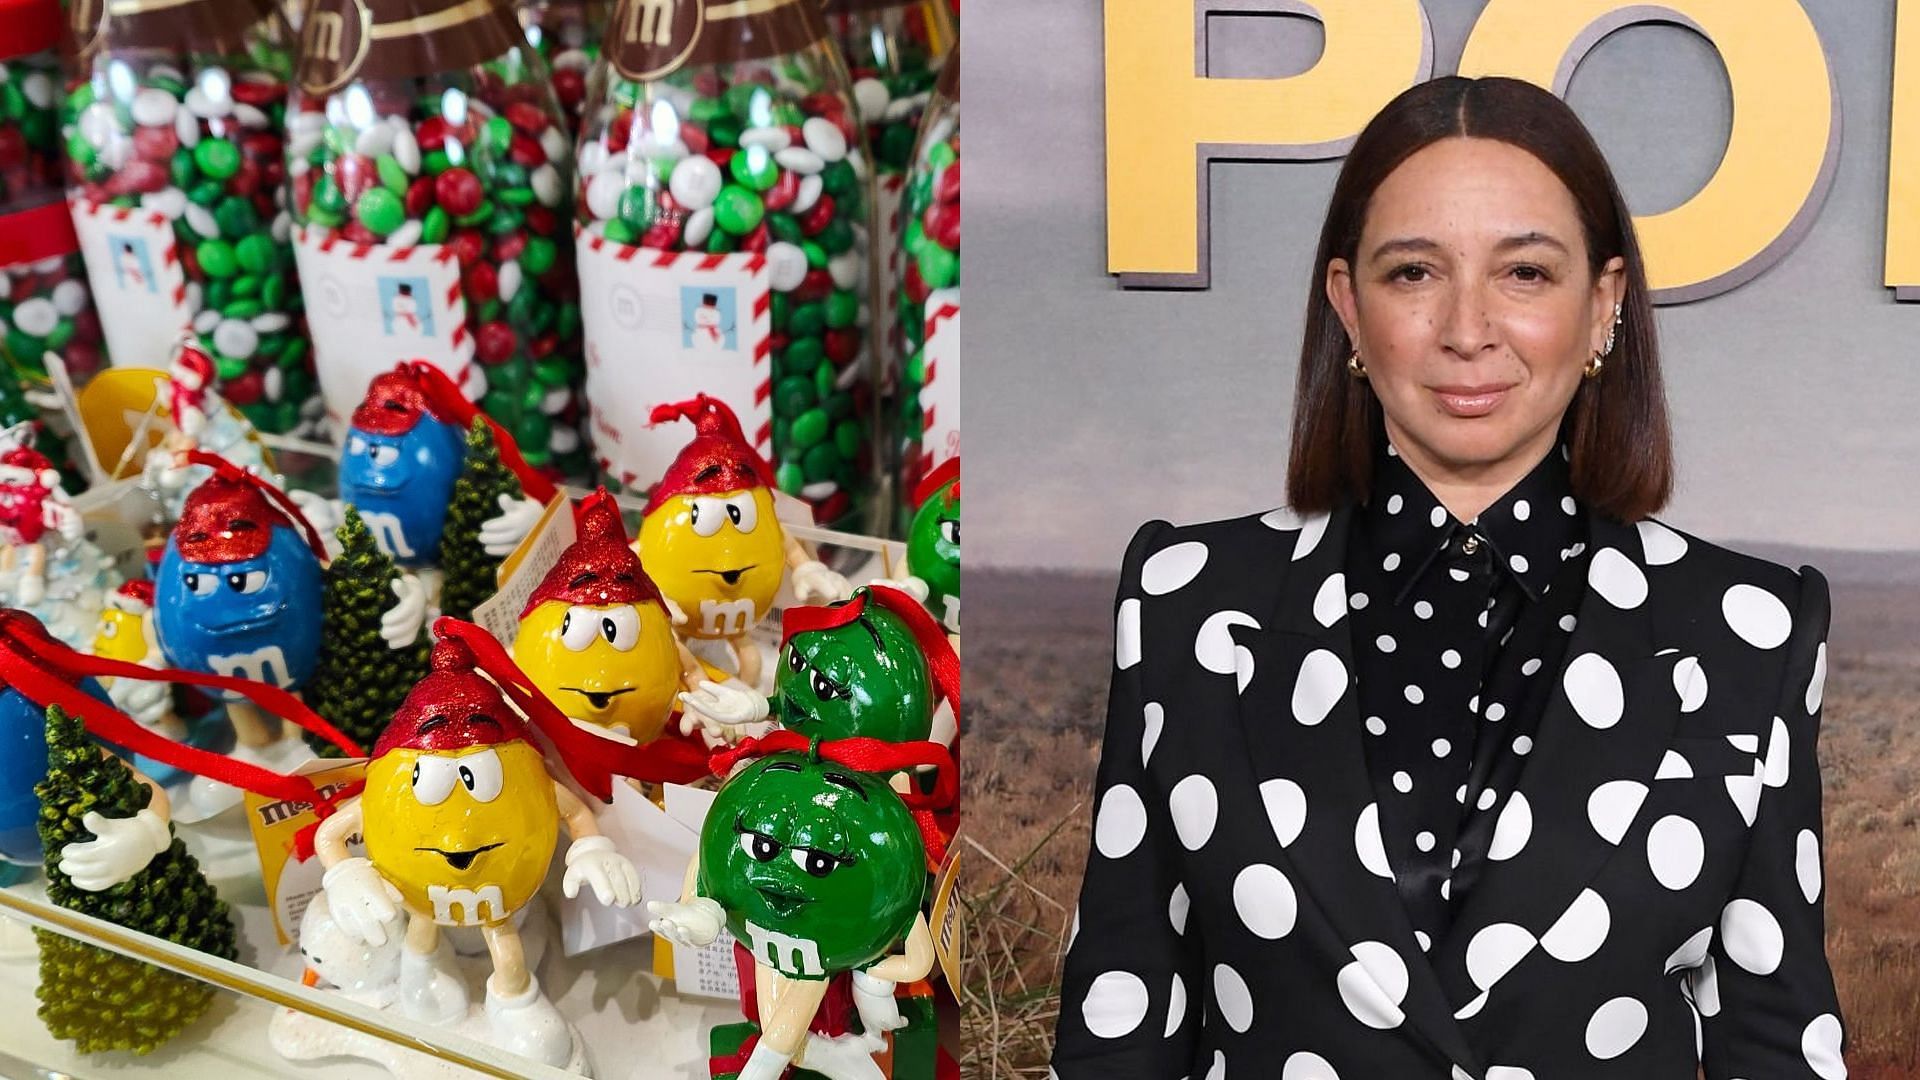 Maya Rudolph replaces spokescandies as new spokesperson for M&amp;M (Image via Getty Images)